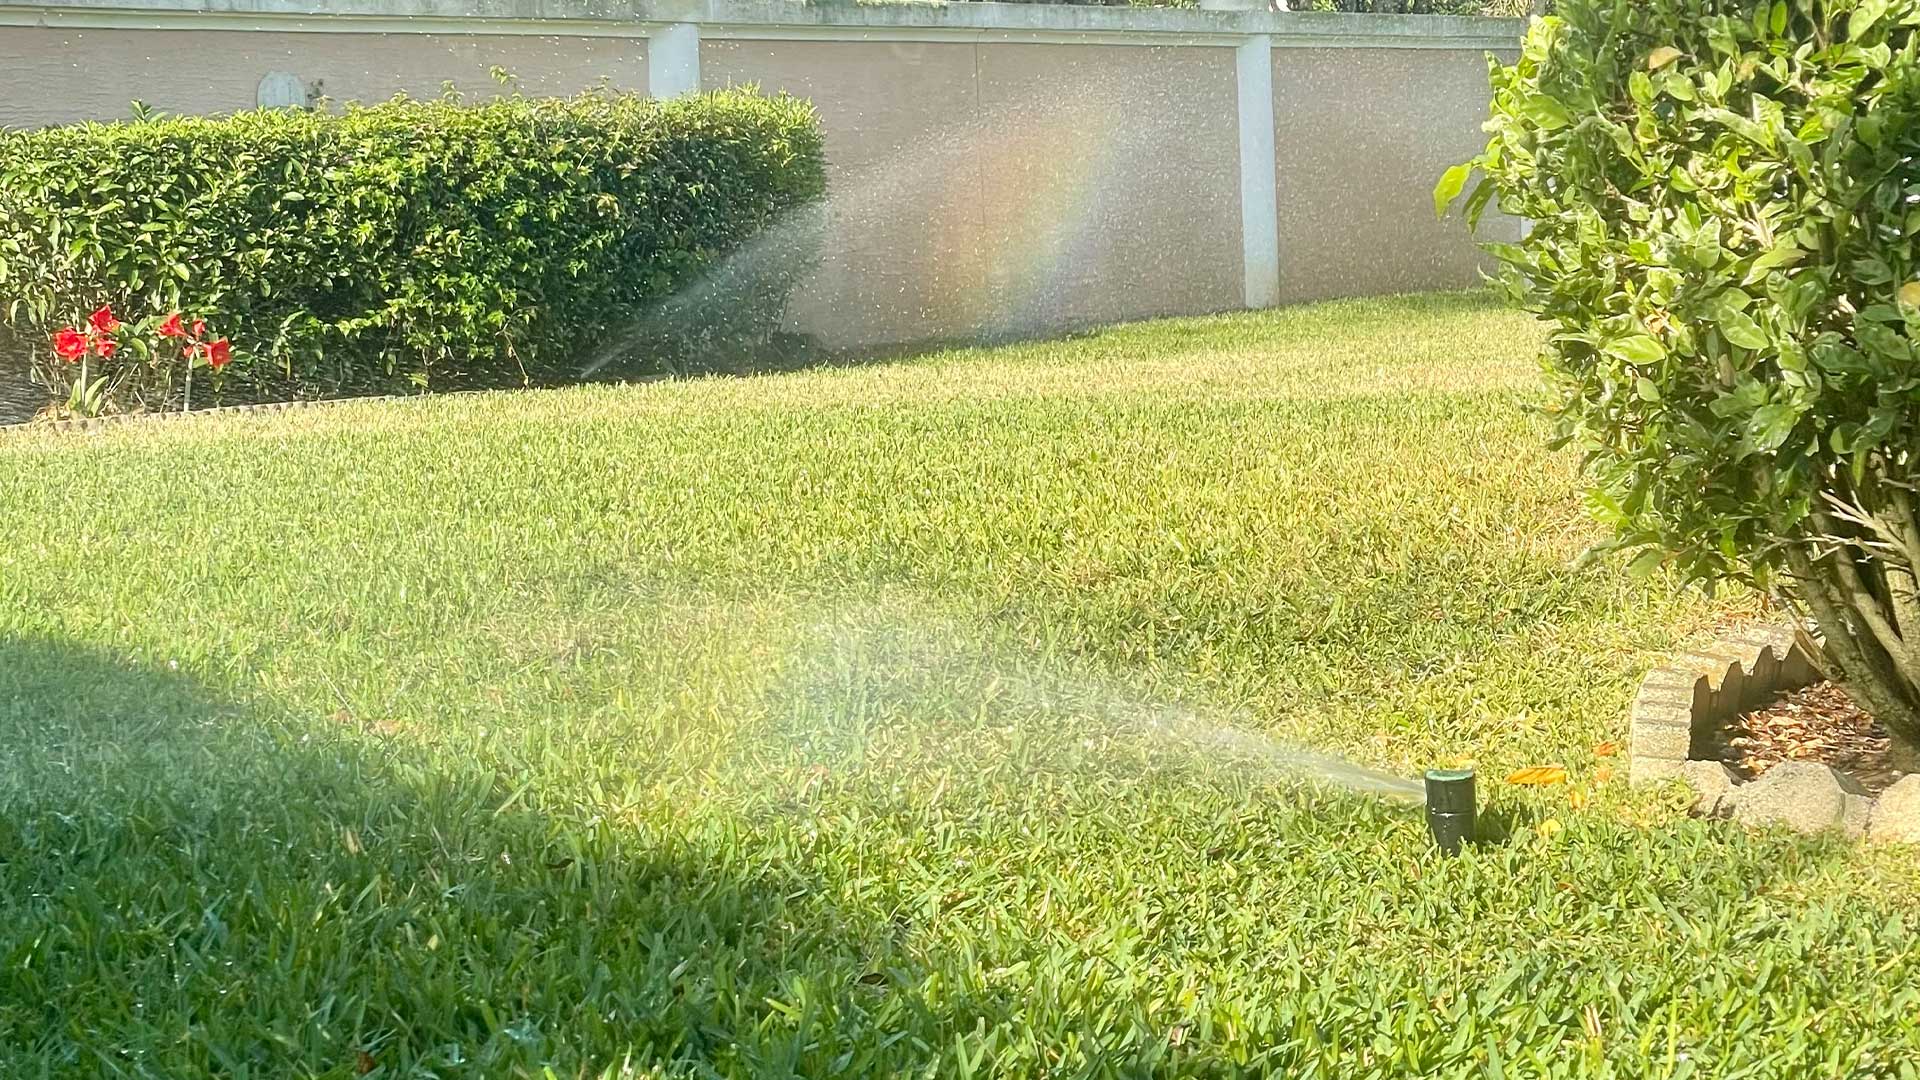 Irrigation system at a property in Highland City, FL that we repaired and replaced the sprinkler heads.